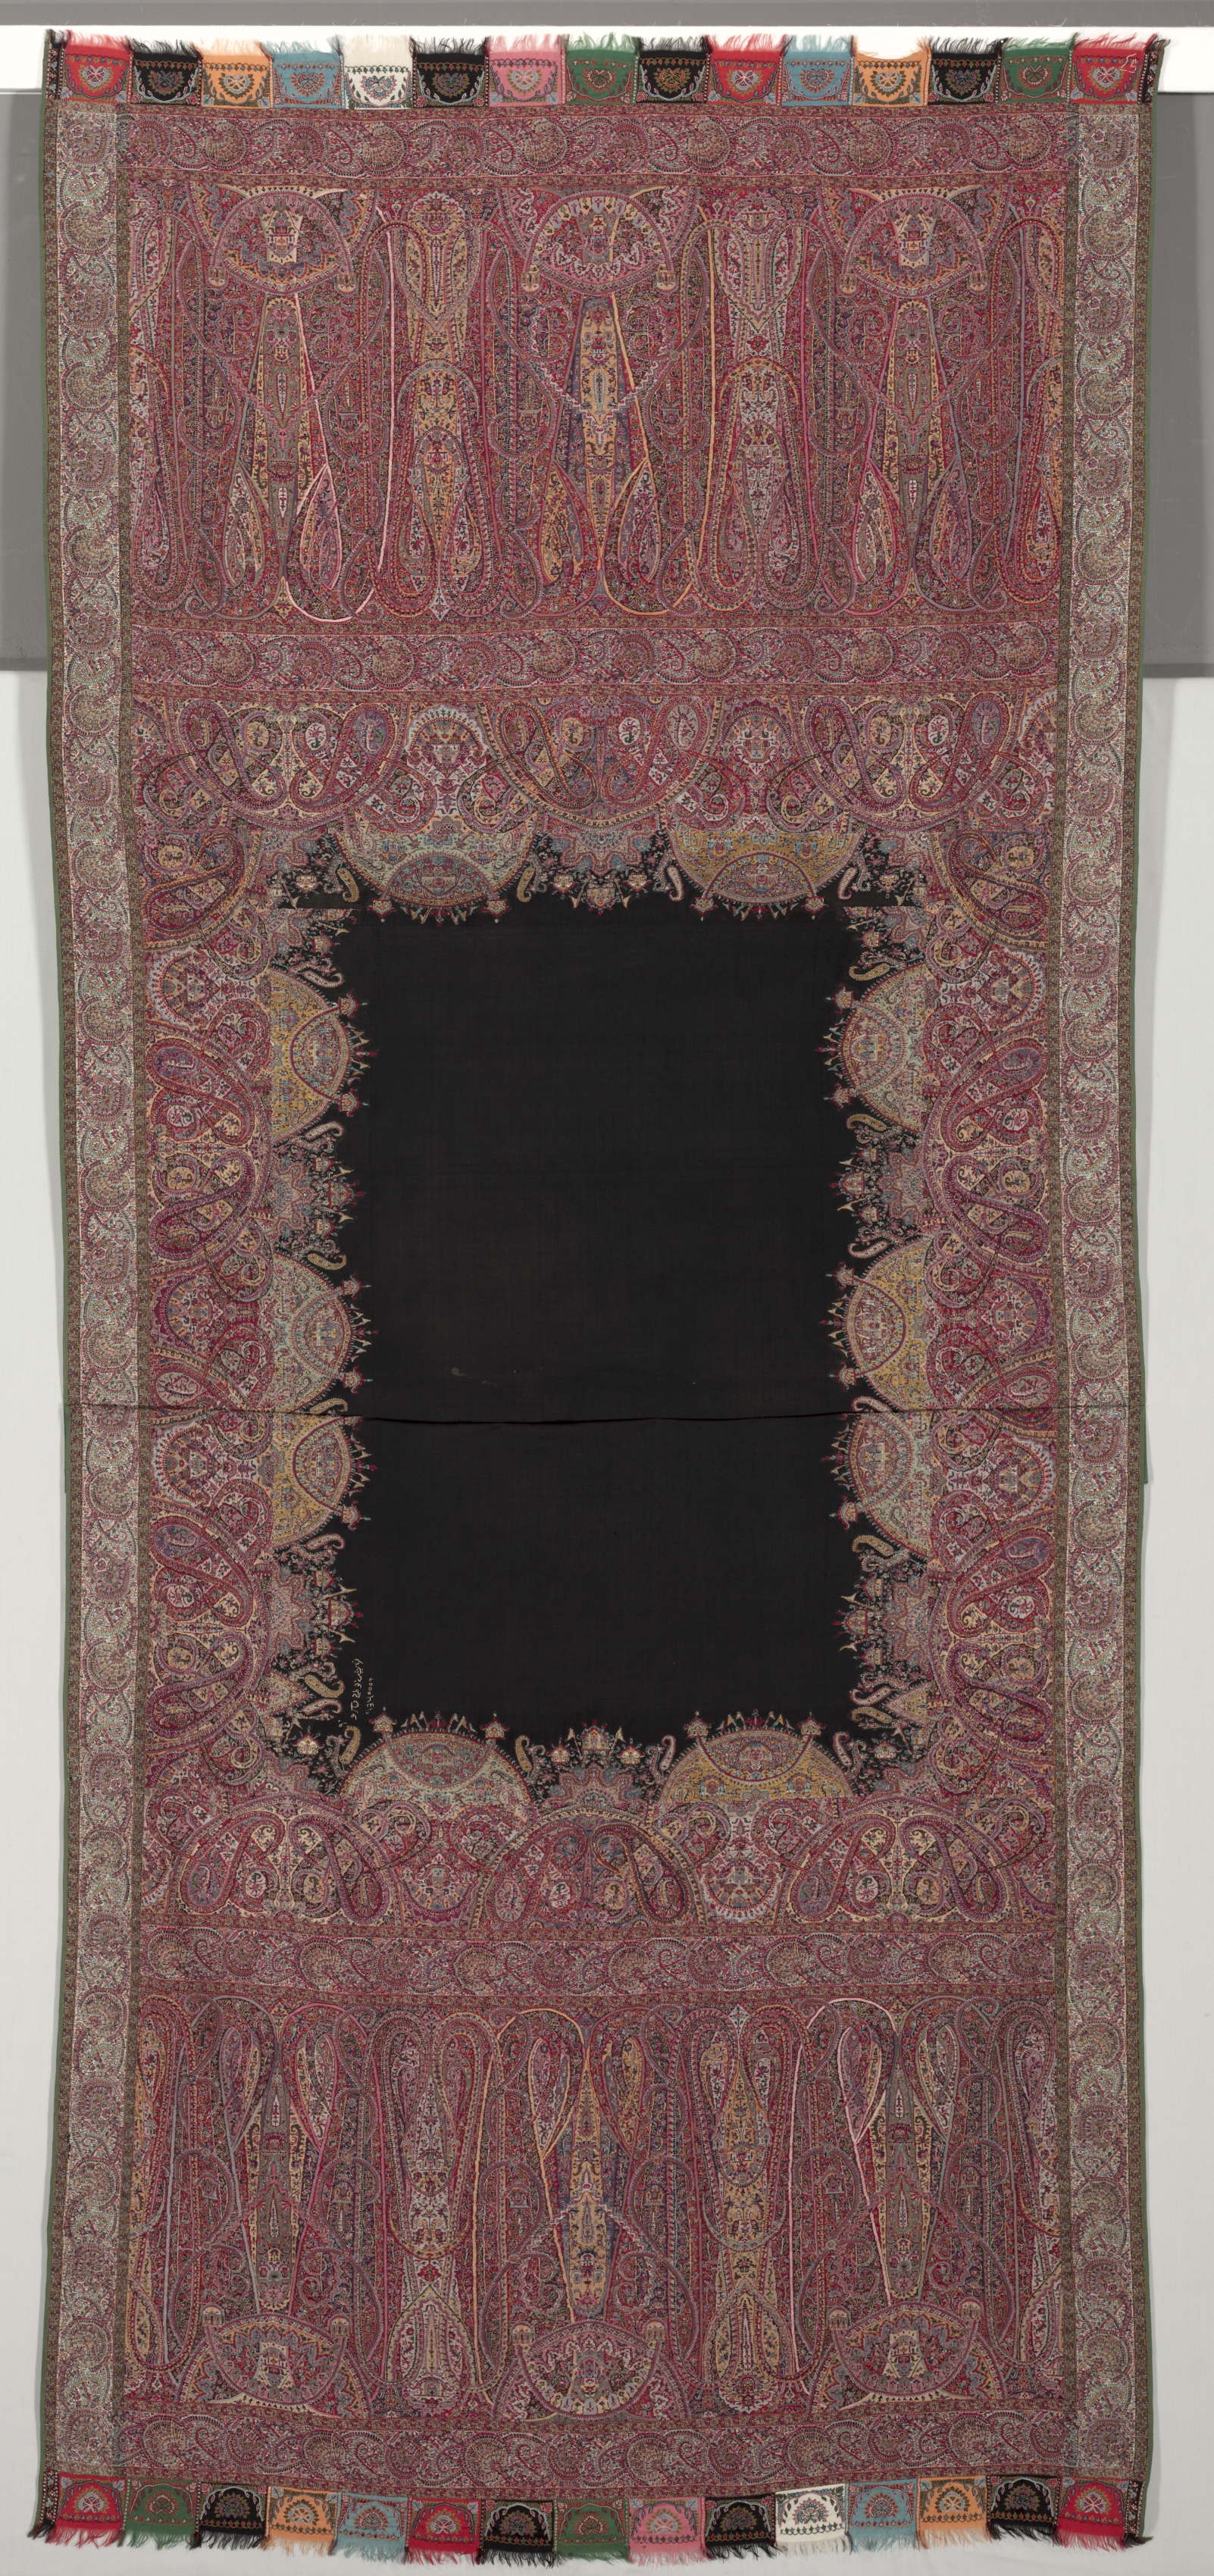 Long Shawl with Black Center and Exotic Four-Sided Gallery in Chinoiserie Style